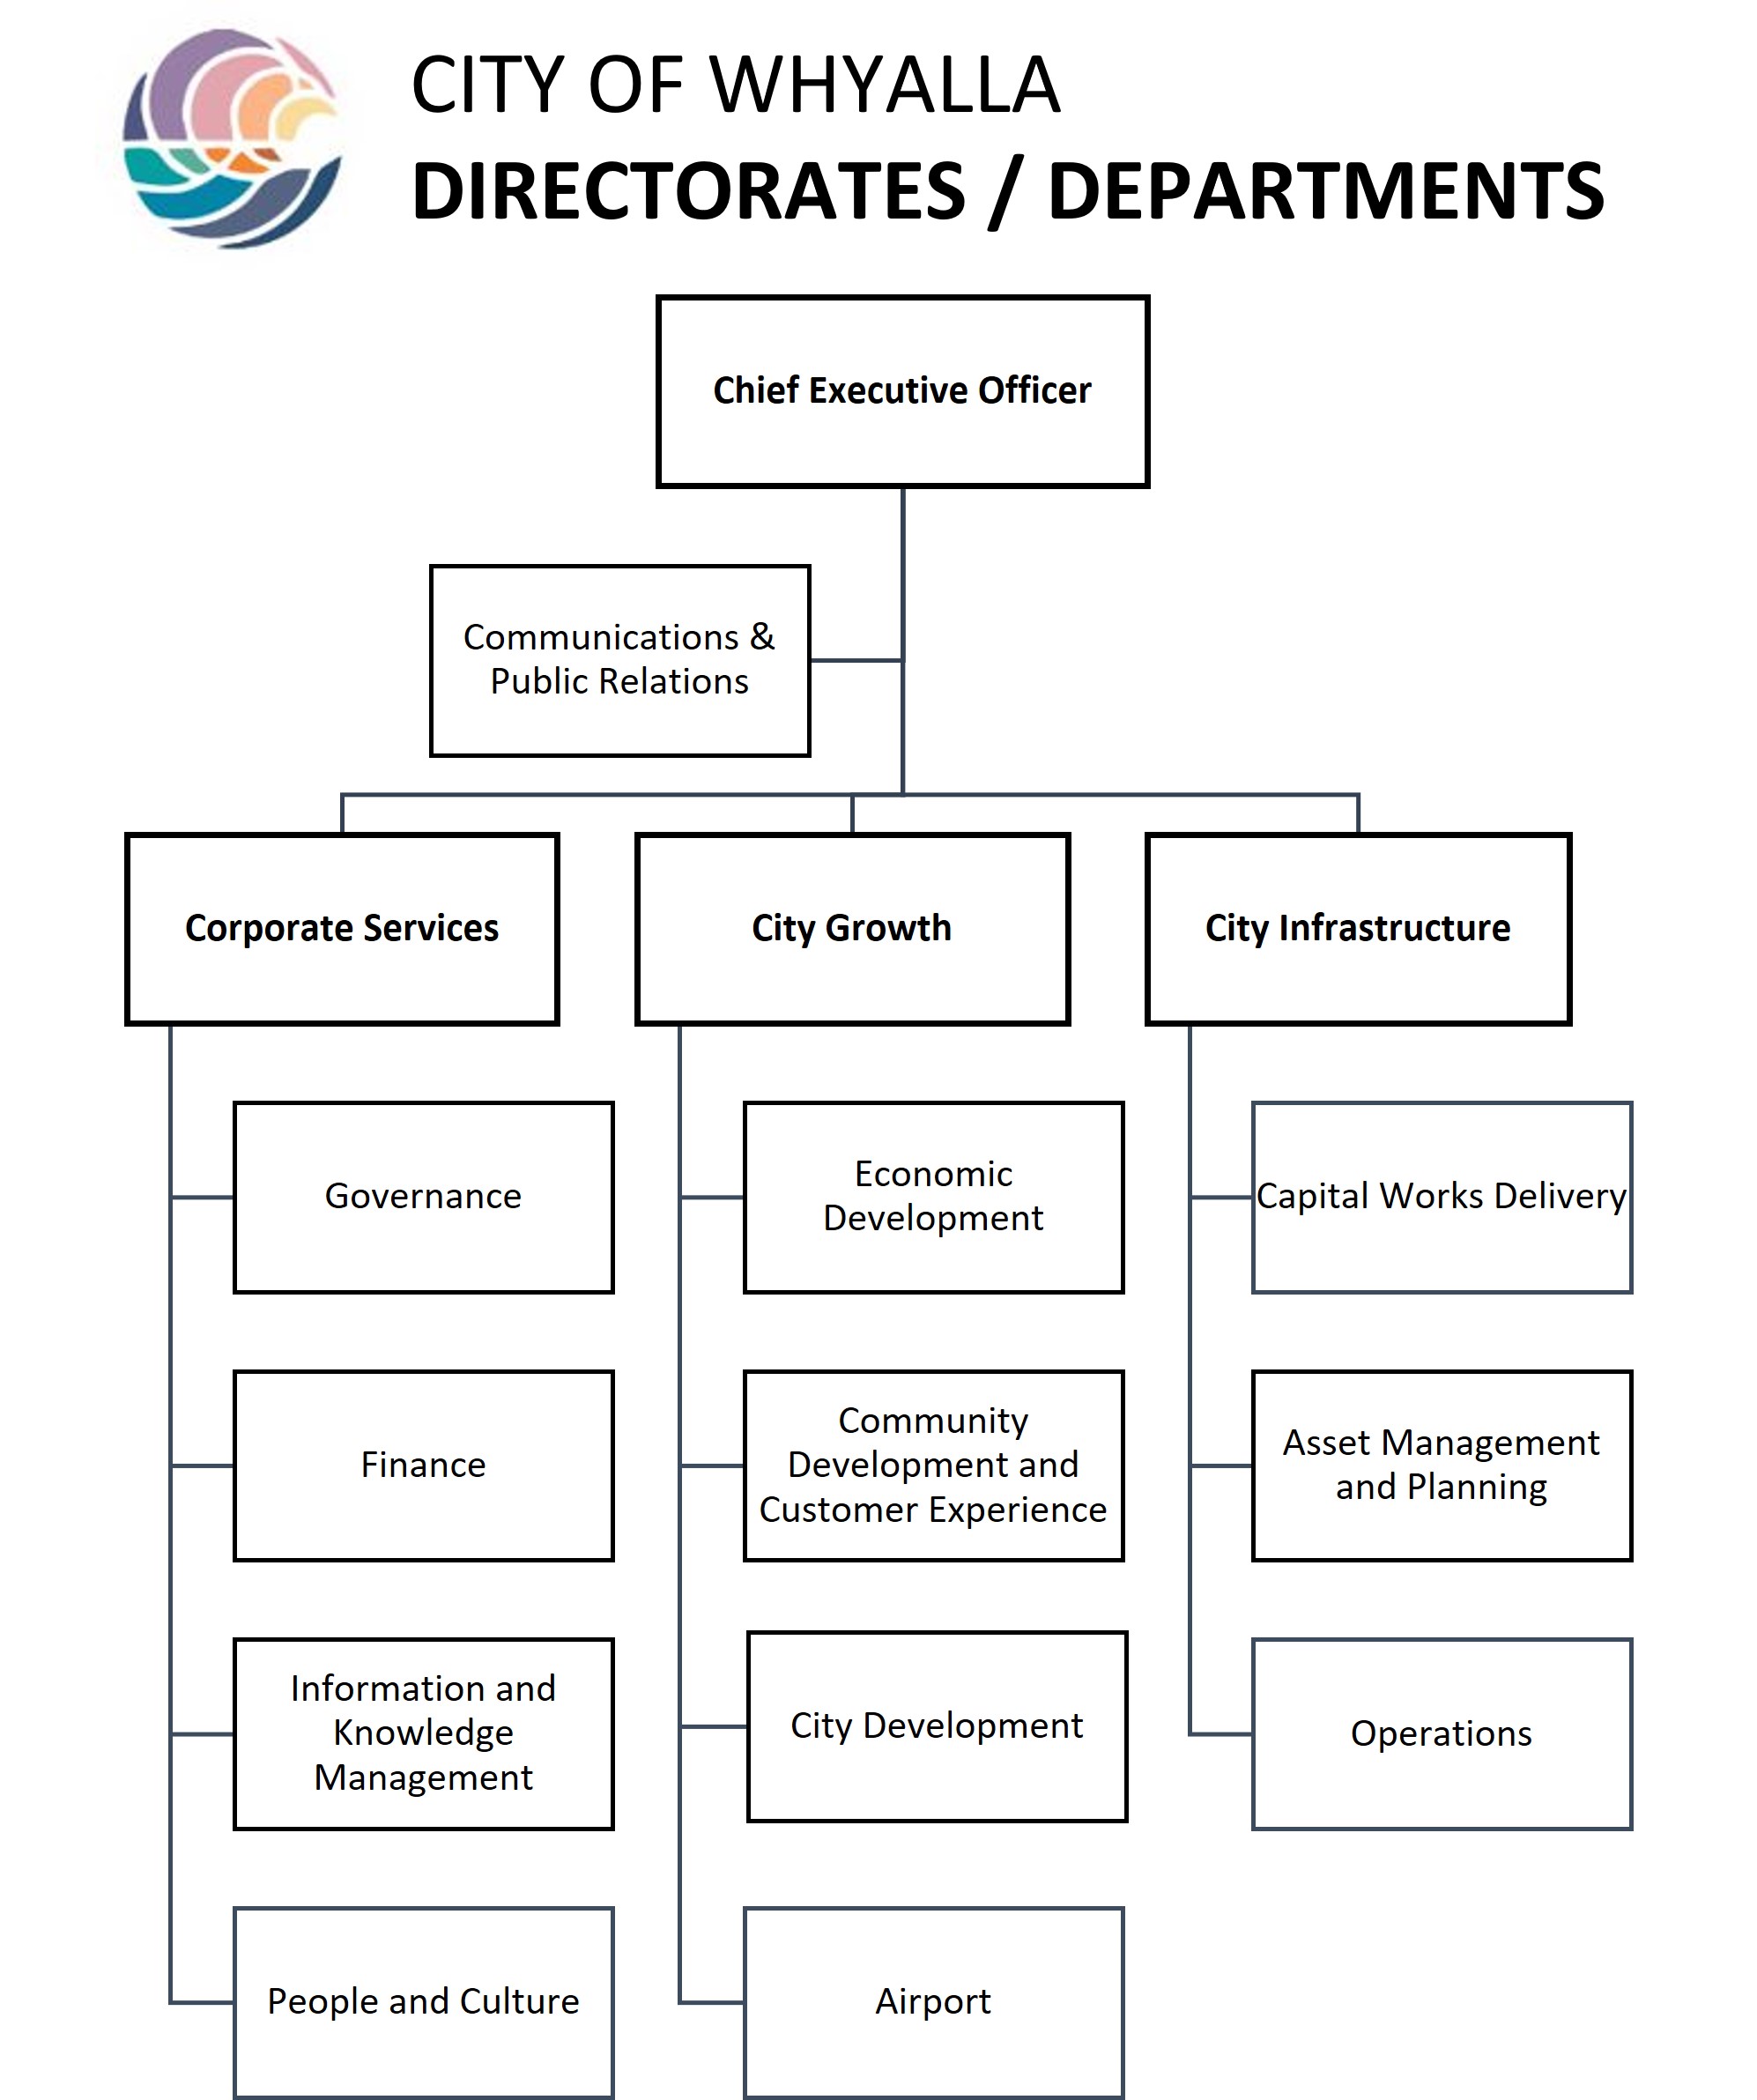 Council Directorates and Departments